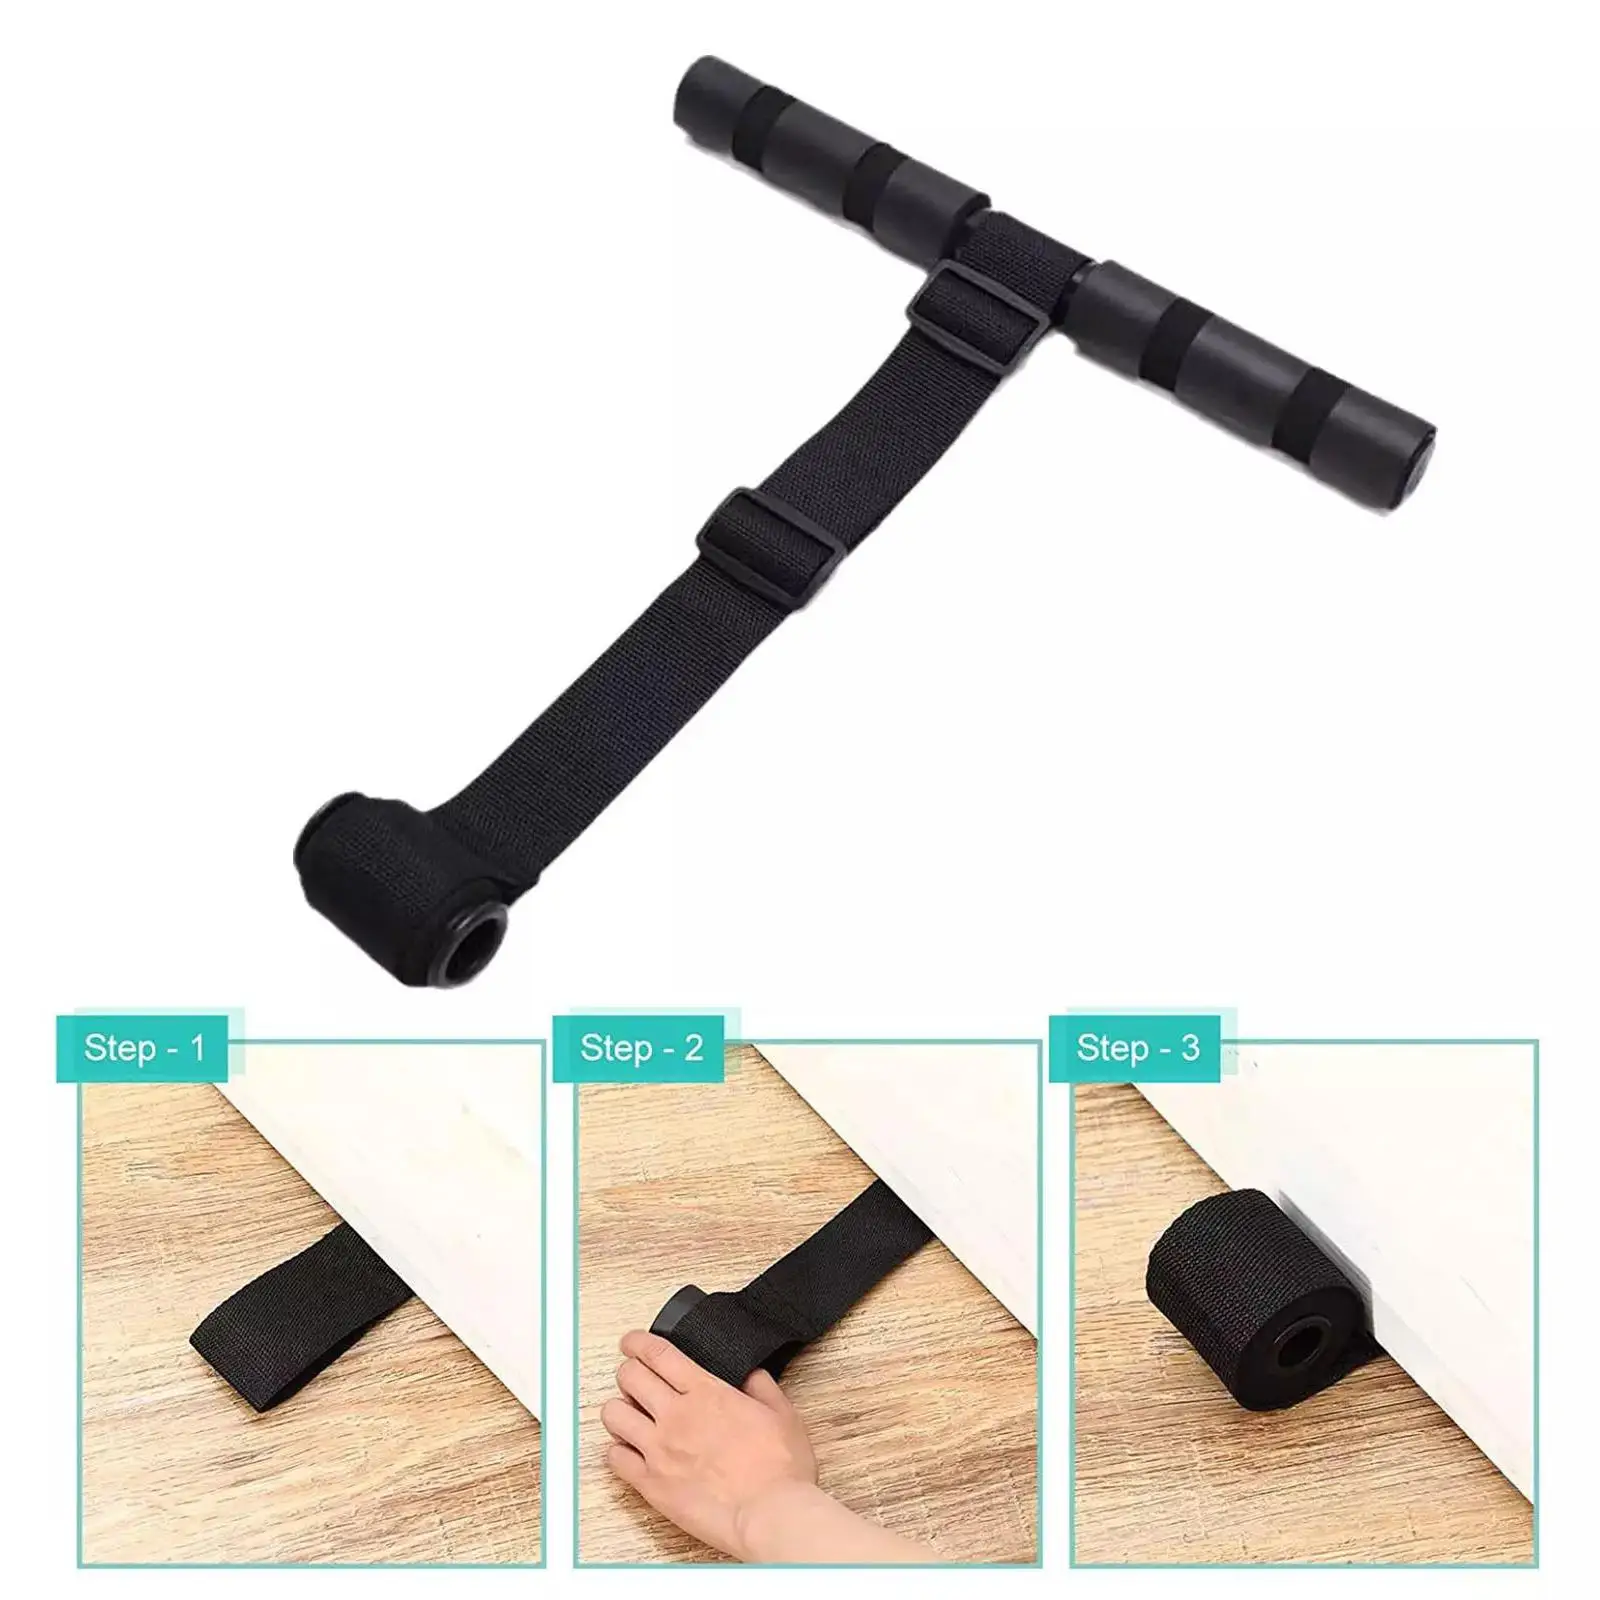 Portable Nordic Hamstring Curl Strap Auxiliary Equipment for Strength Training Travel